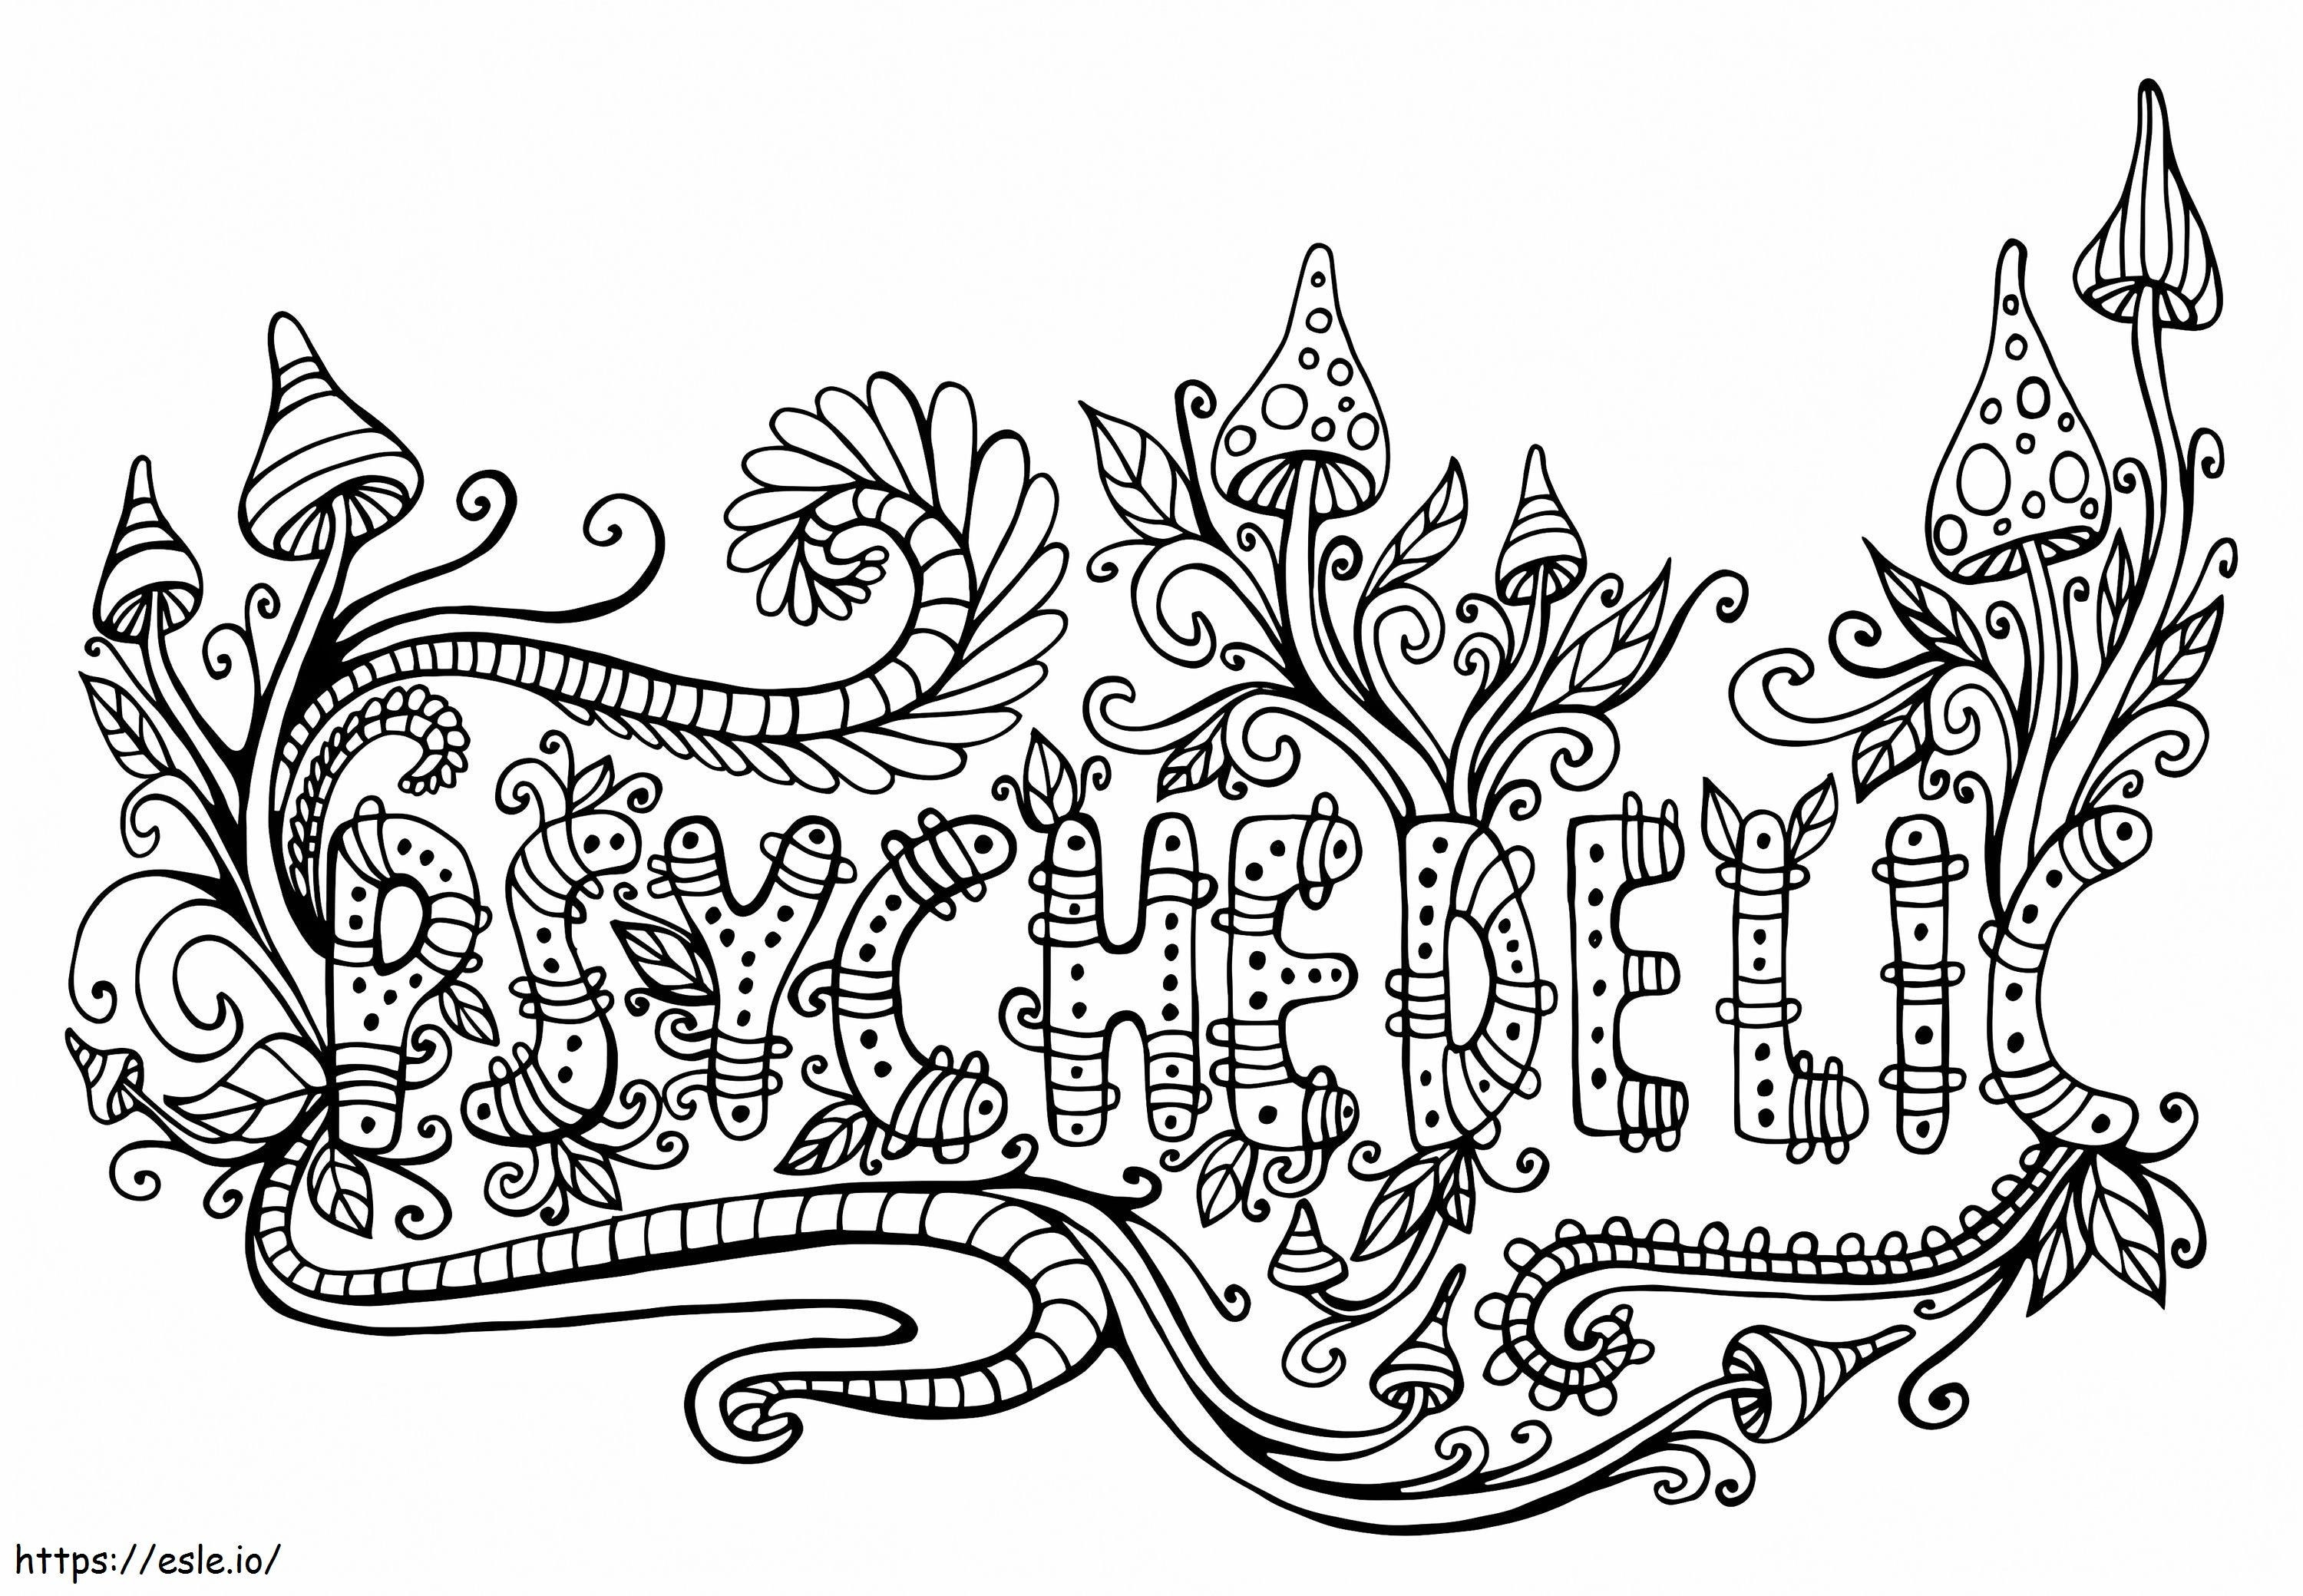 Word Psychedelic coloring page